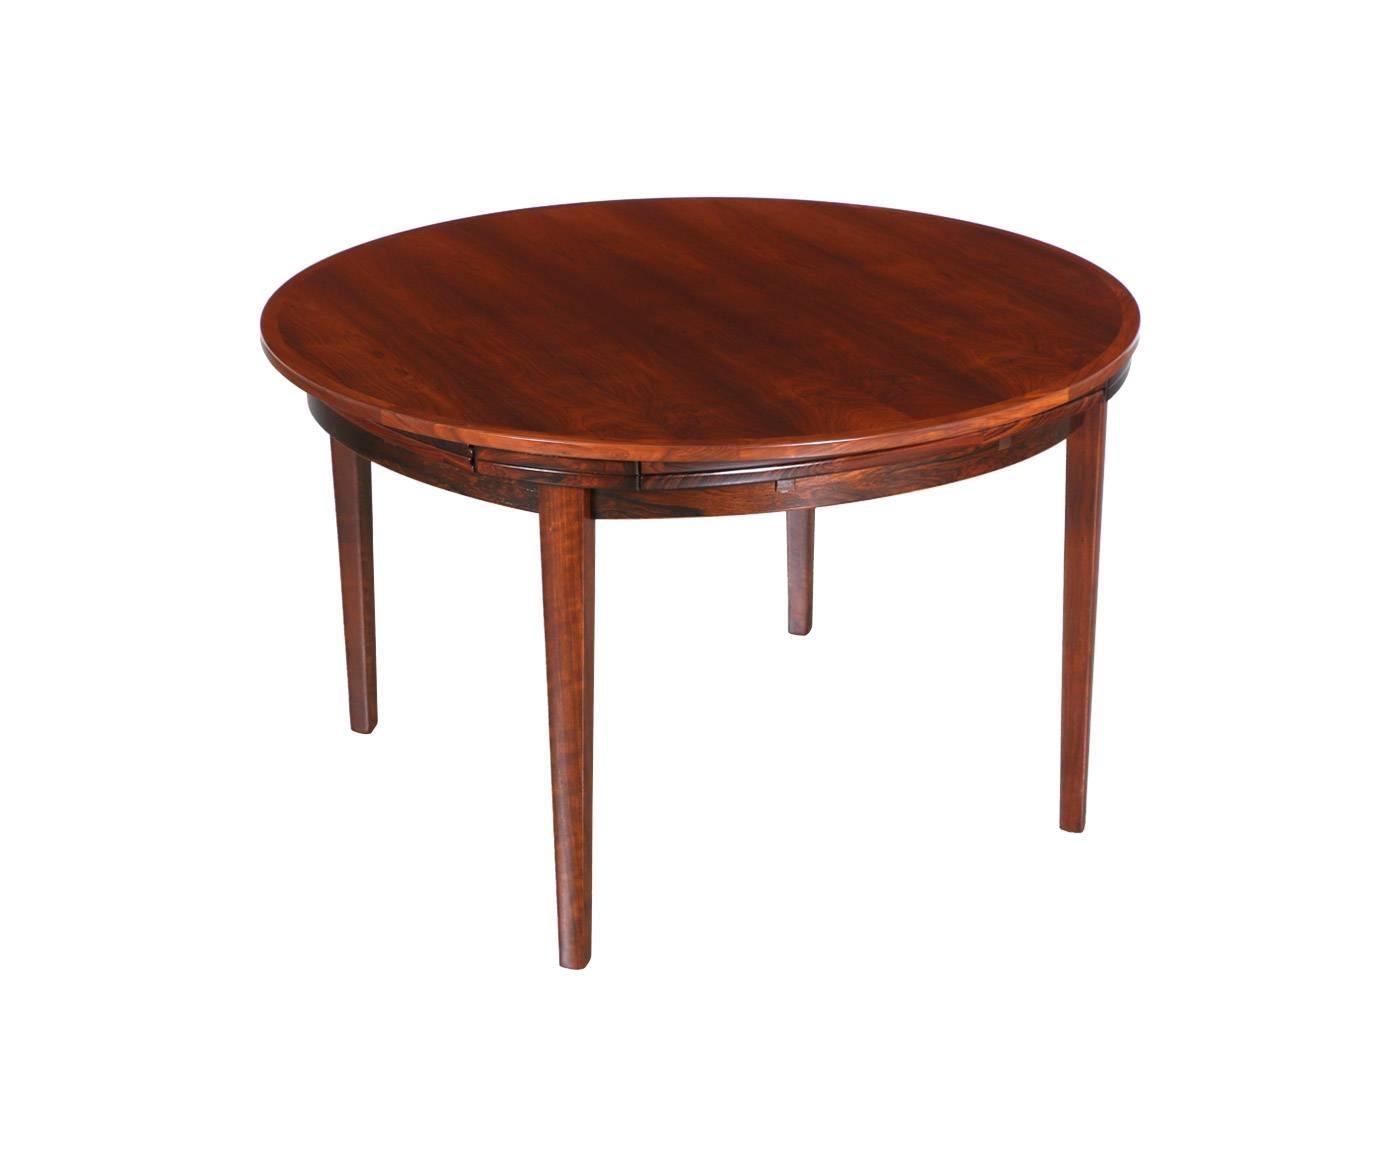 Designer: Dyrlund.
Manufacturer: Dyrlund.
Period/Style: Danish modern.
Country: Denmark.
Date: 1960s.

Dimensions: 28.75″ H x 47″ – 68.5″ diameter.
Materials: Rosewood, brass.
Condition: Excellent, newly refinished.
Number of items: